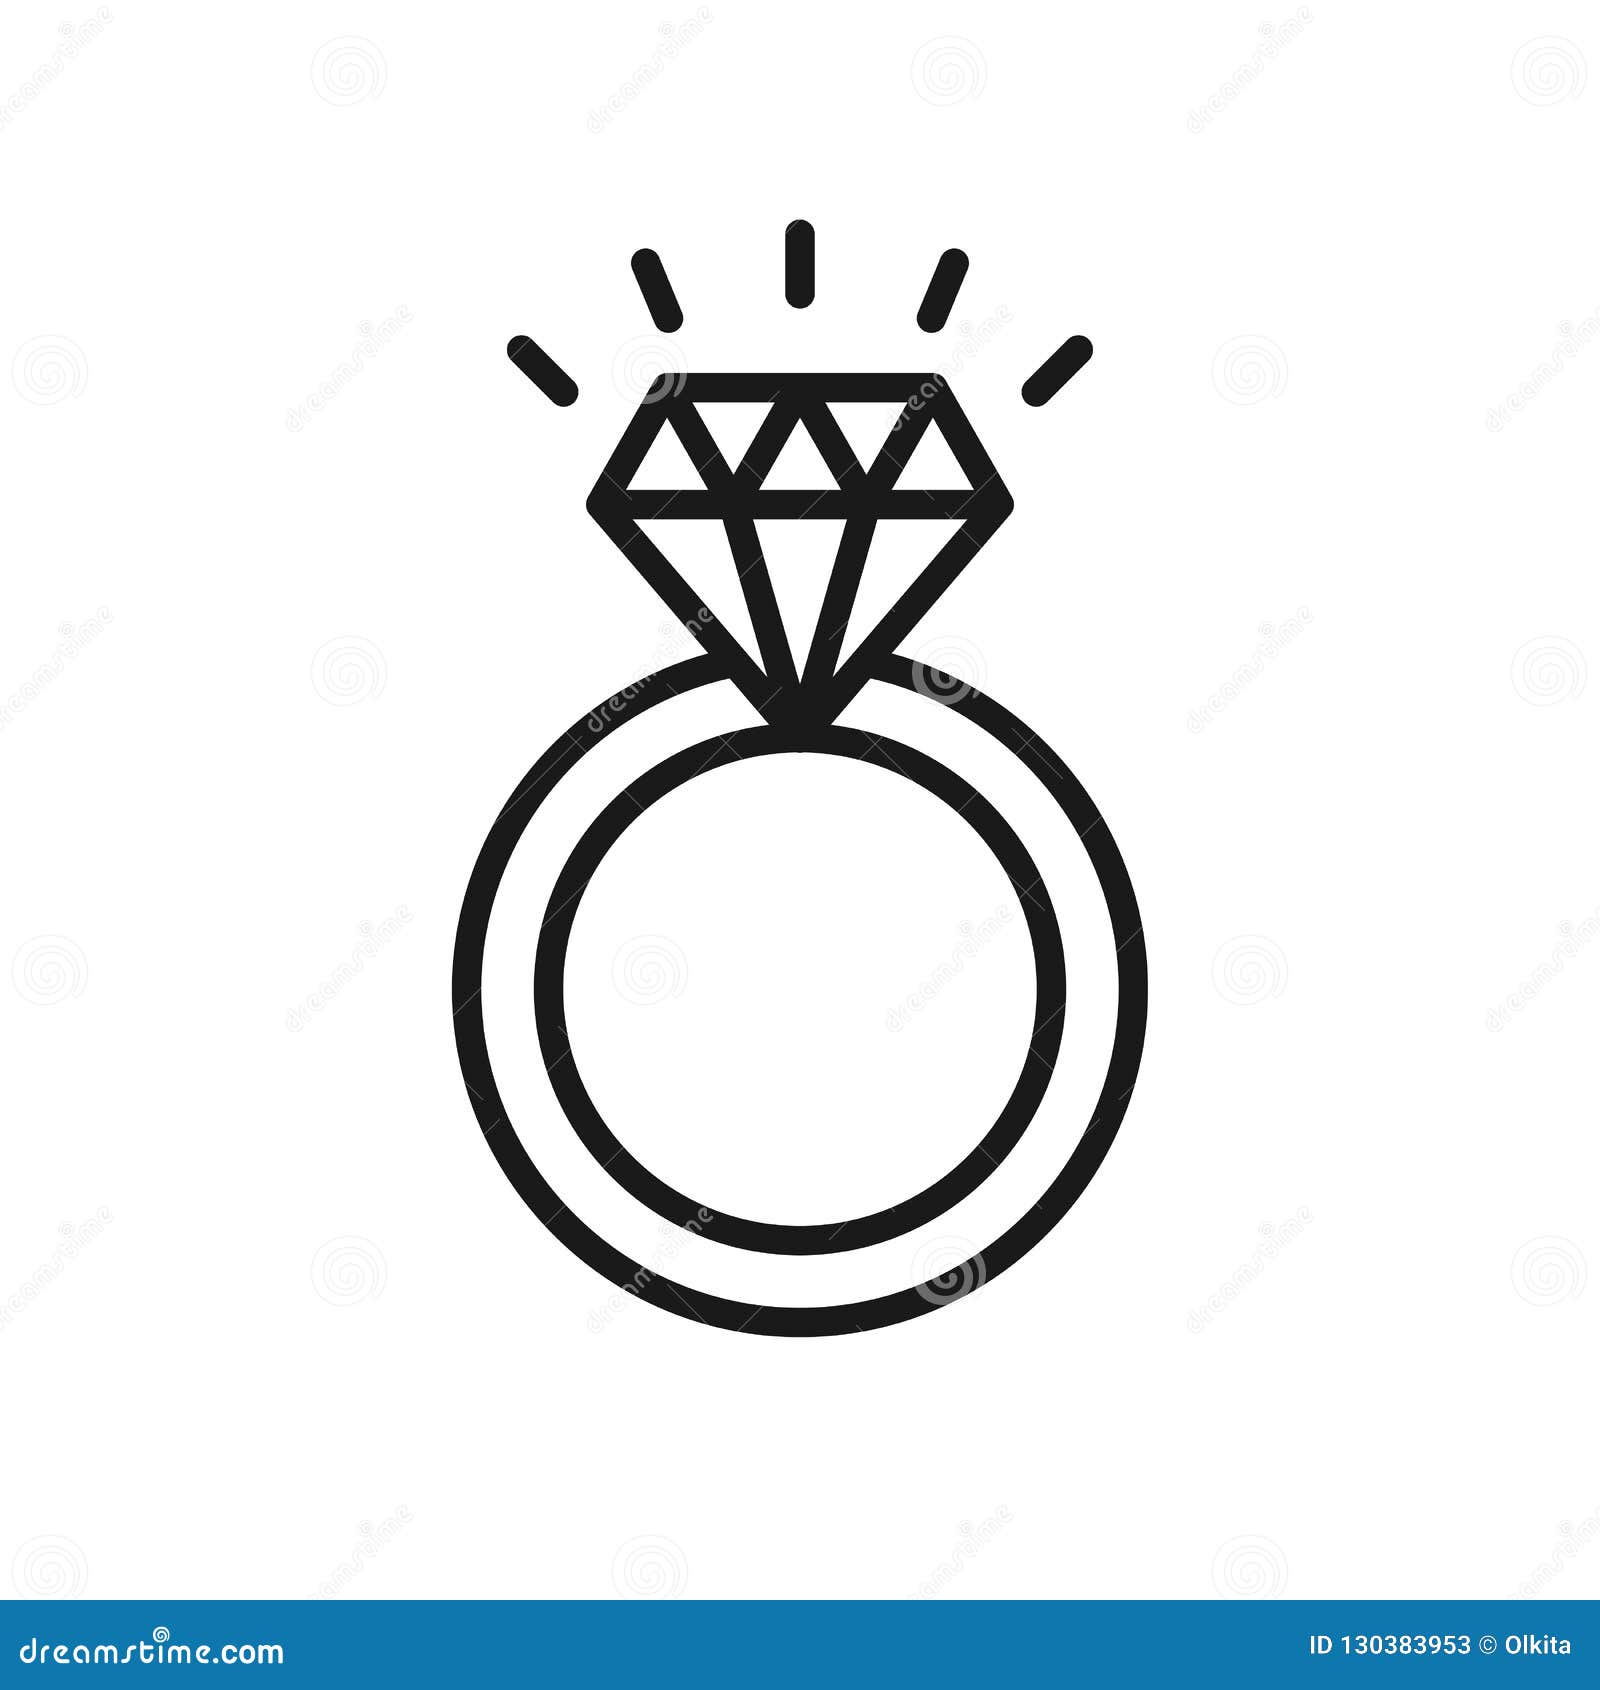 Download Black Isolated Outline Icon Of Ring With Diamond On White ...